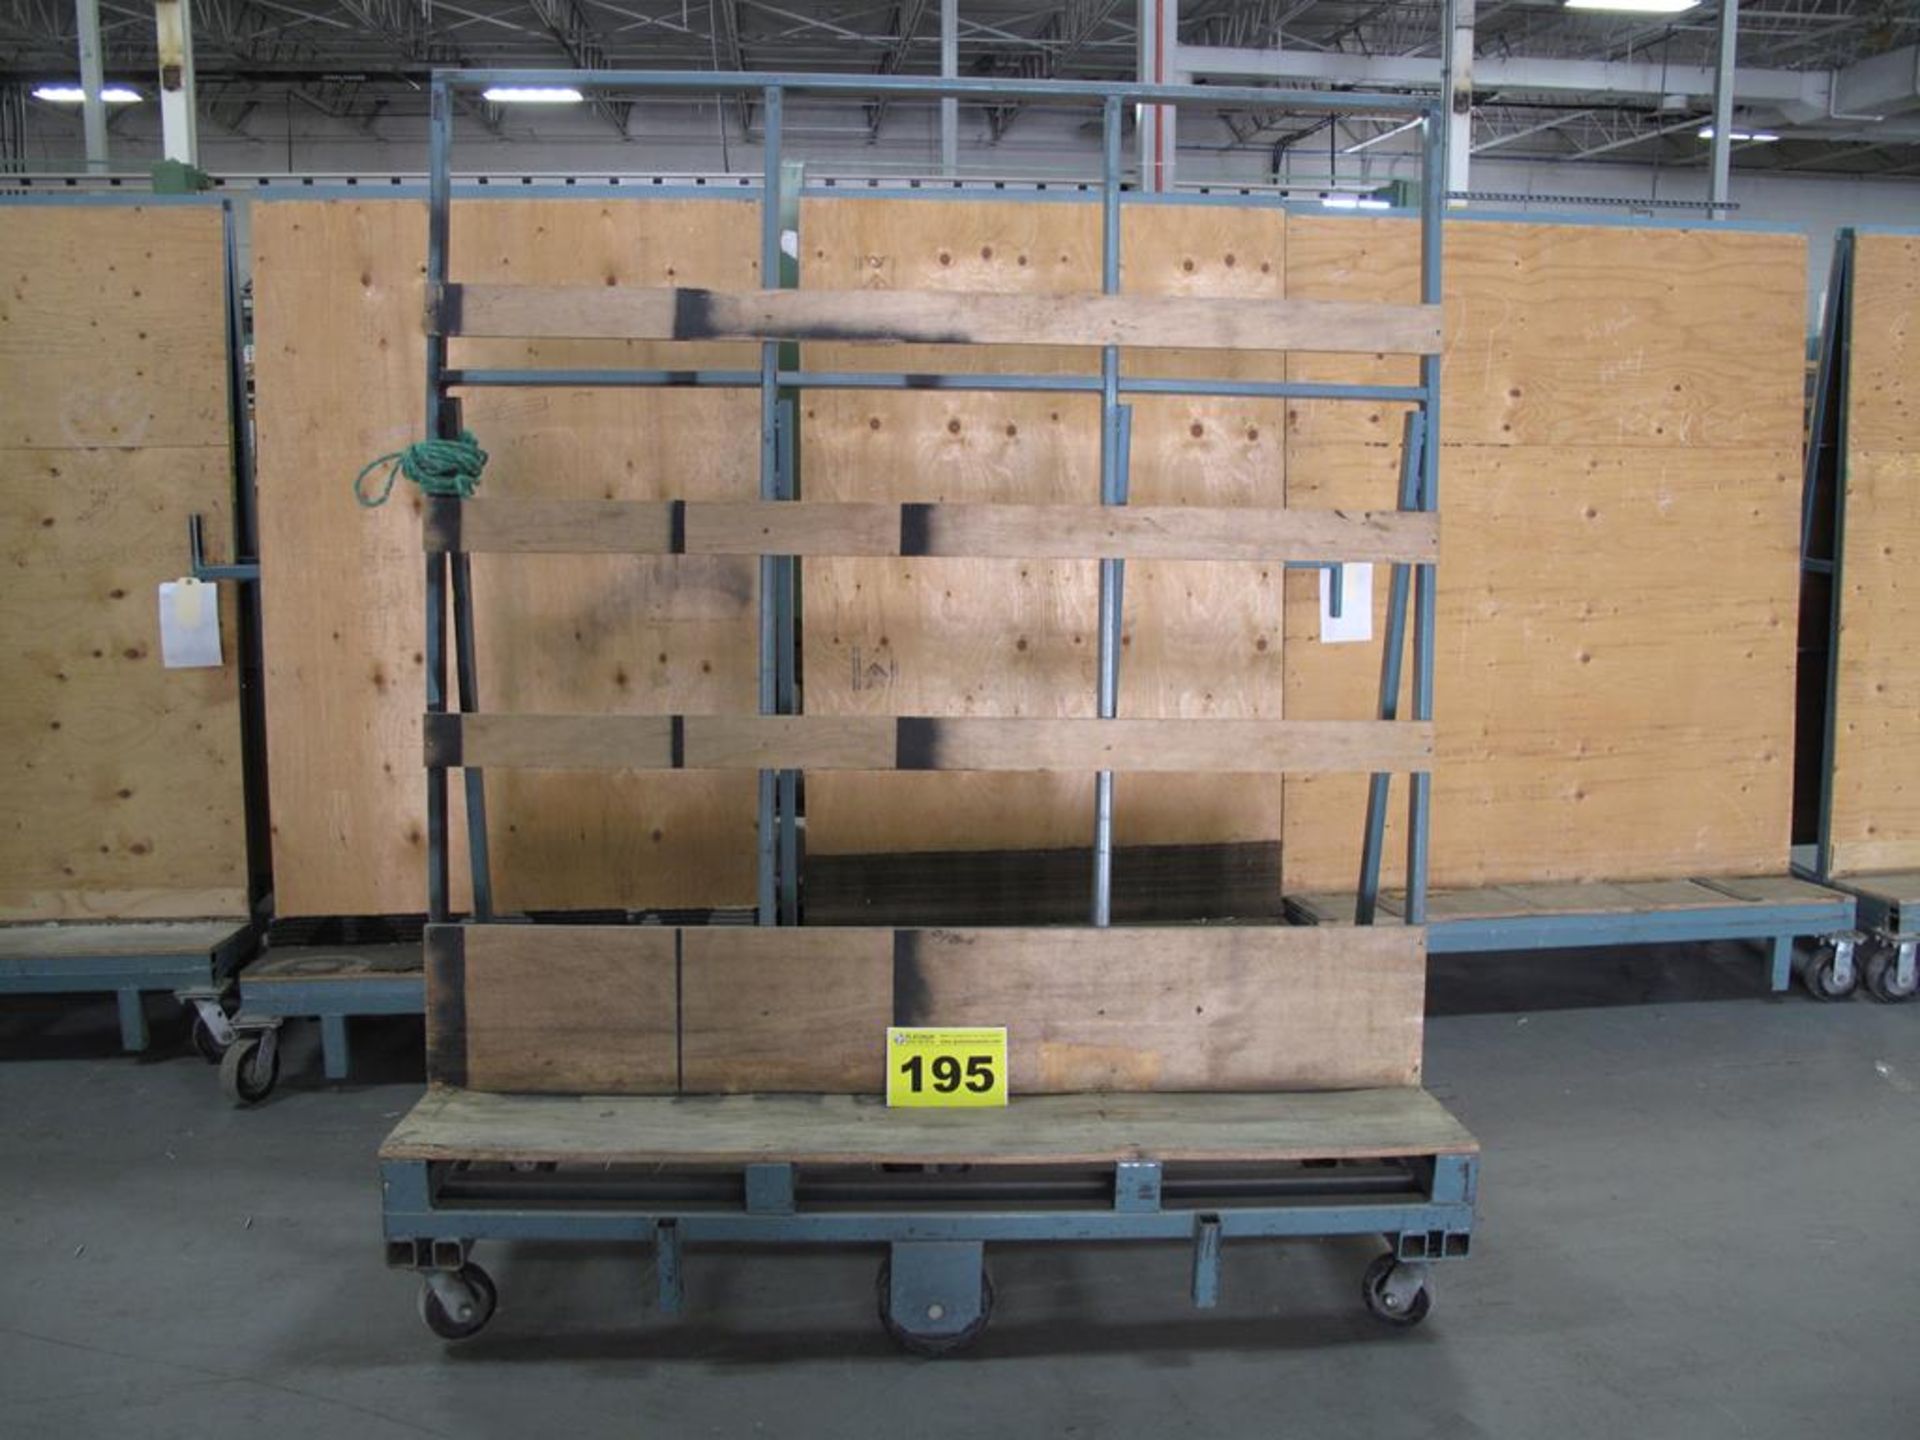 KEAR MFG, 3' X 6 'X 7', 3,000 LBS, SINGLE SIDED, ROLLING GLASS PRODUCTION CART WITH 6 CASTERS